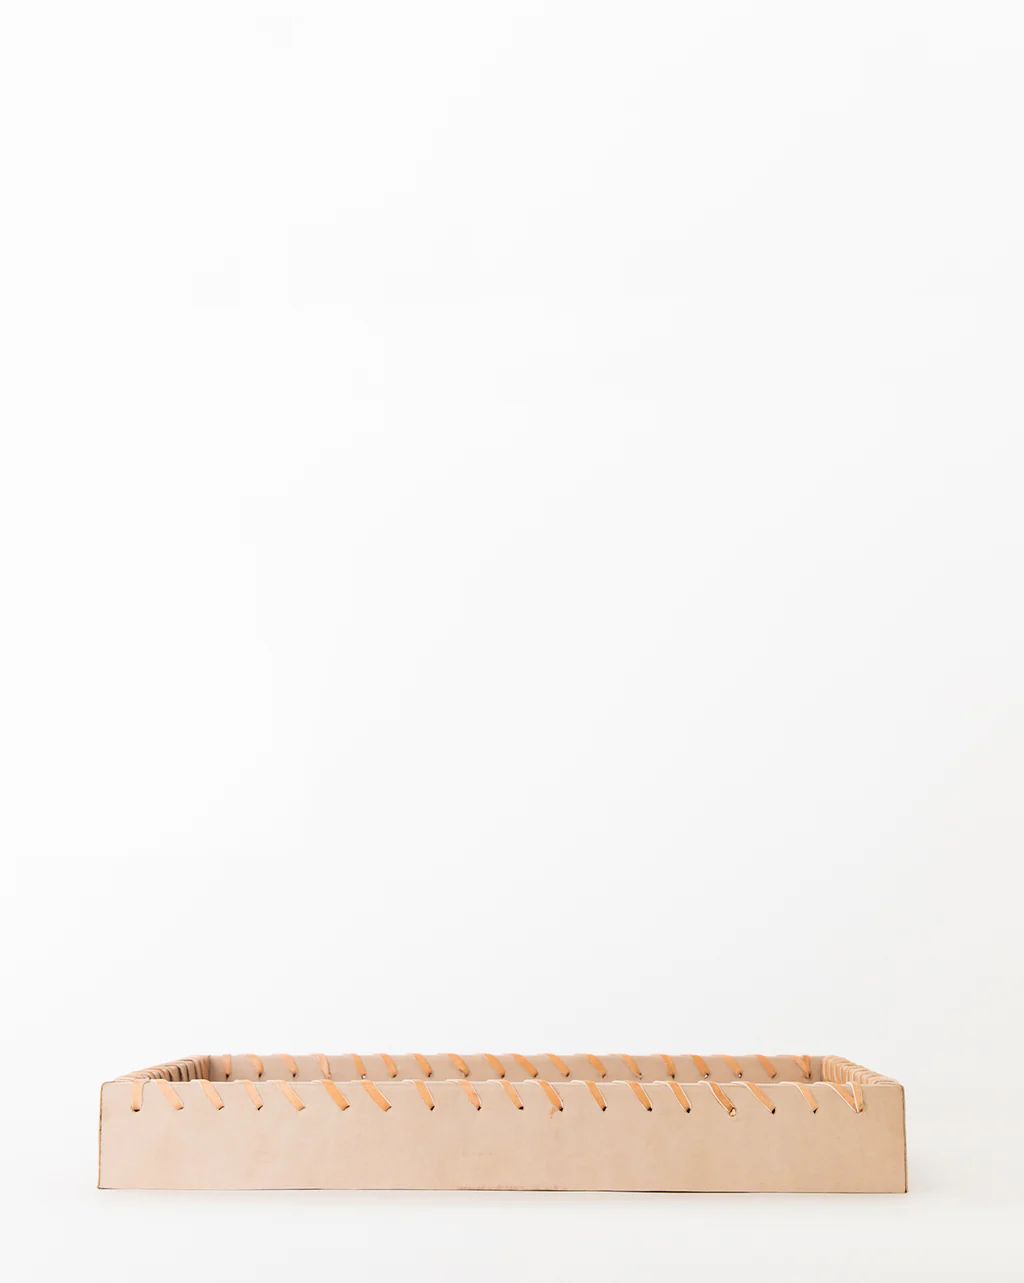 Wrapped Leather Tray | McGee & Co.